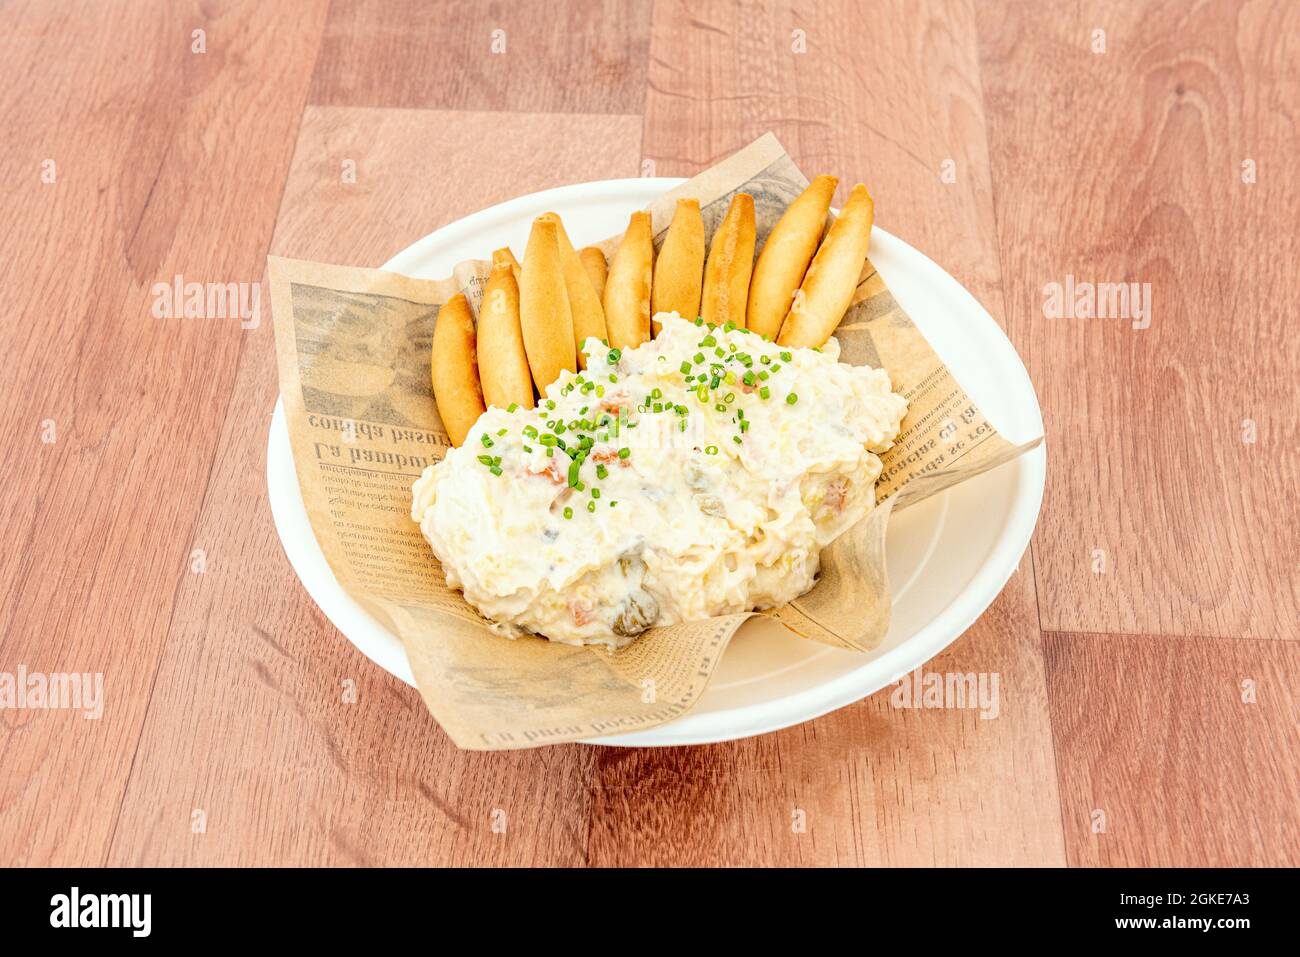 Russian salad with mayonnaise, olives, carrot, egg and boiled potatoes and a good amount of croutons to share as typical Spanish tapas on a brown tabl Stock Photo